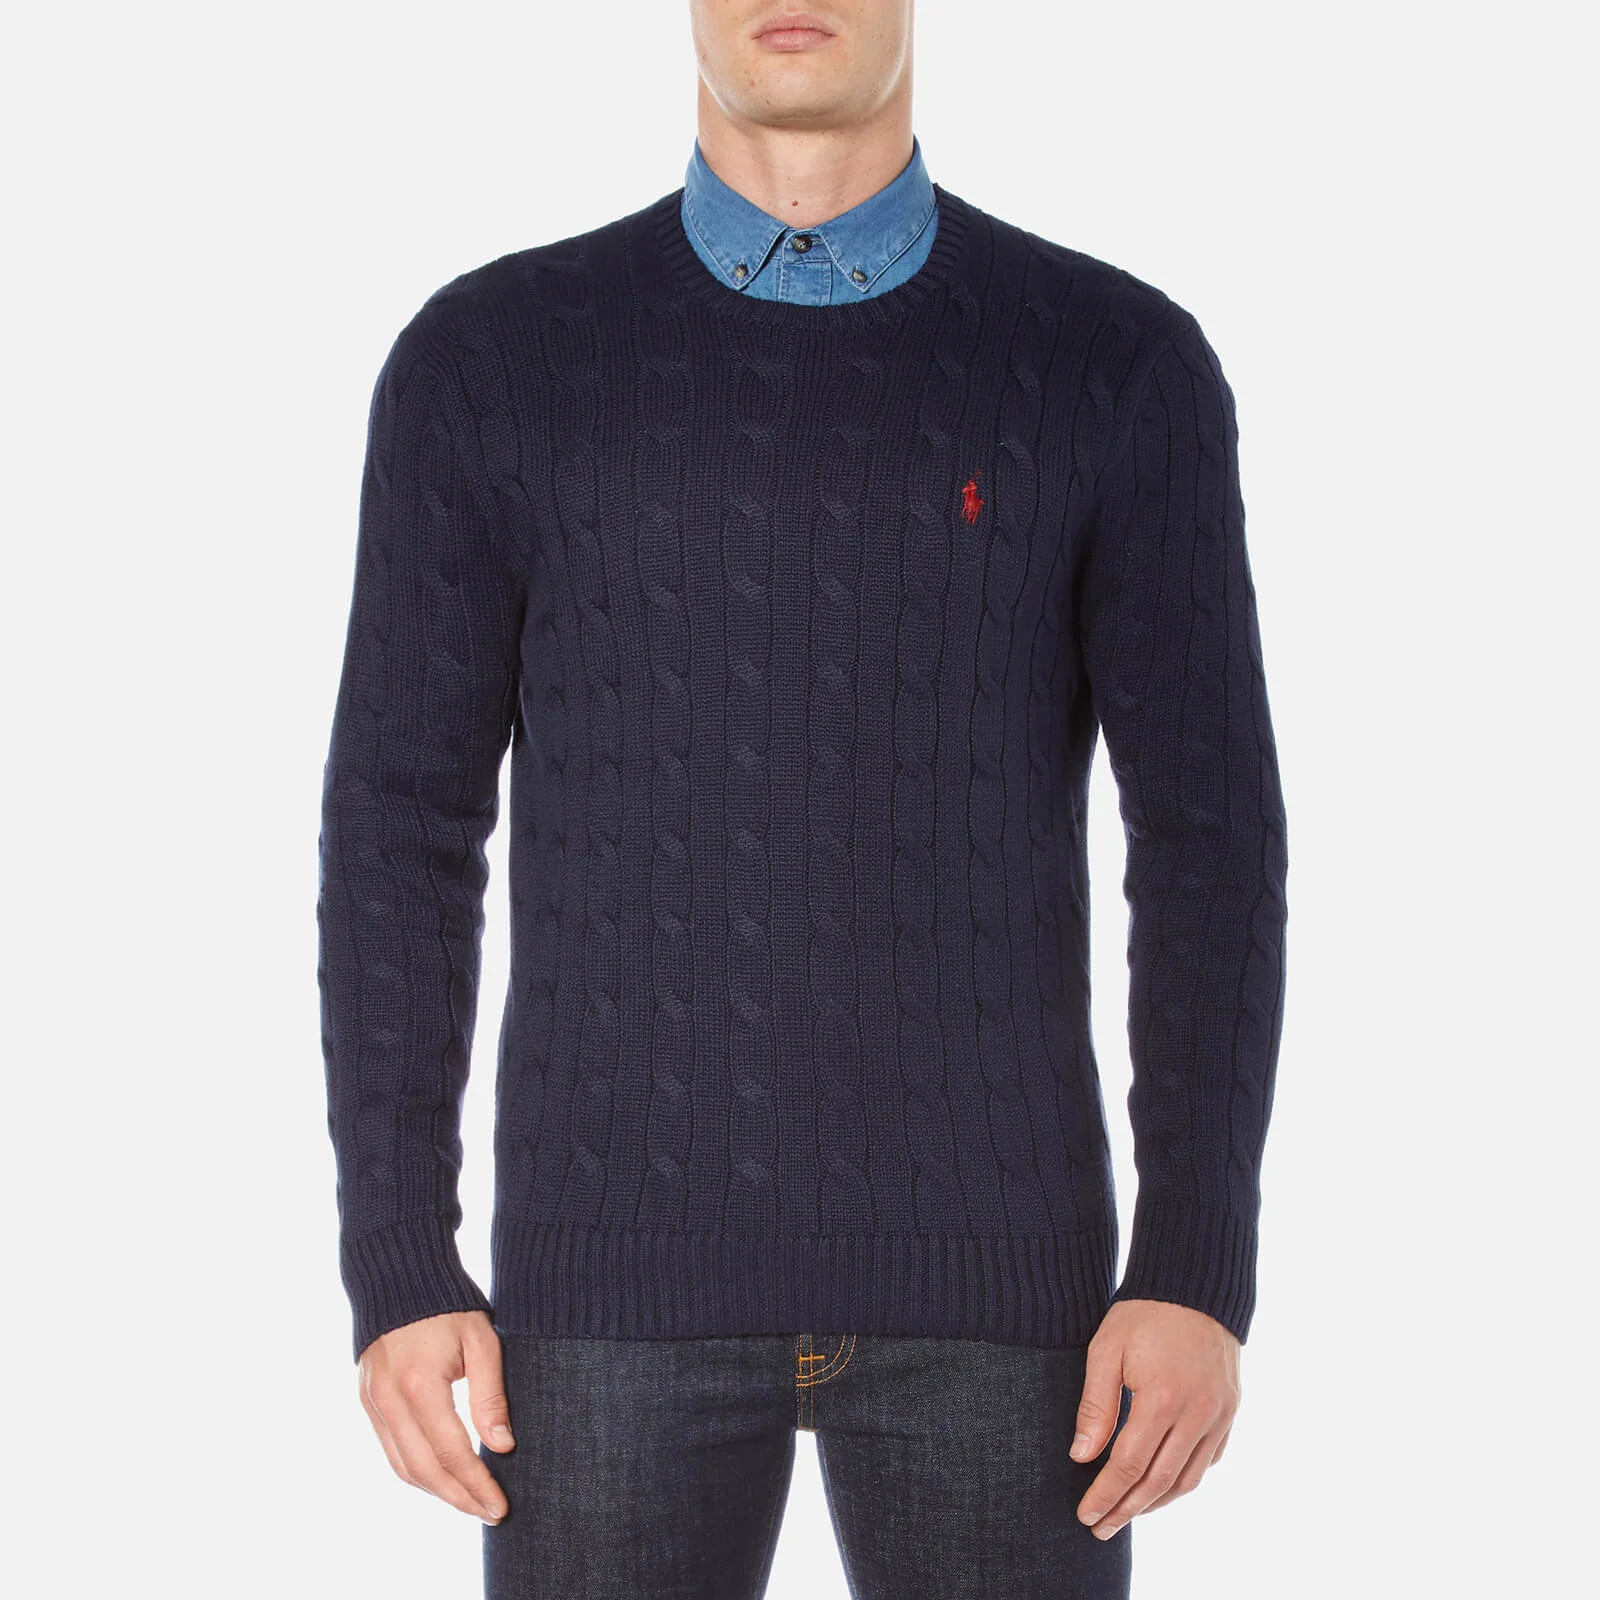 Polo Ralph Lauren Men's Crew Neck Cable Knitted Jumper - Hunter Navy Image 1